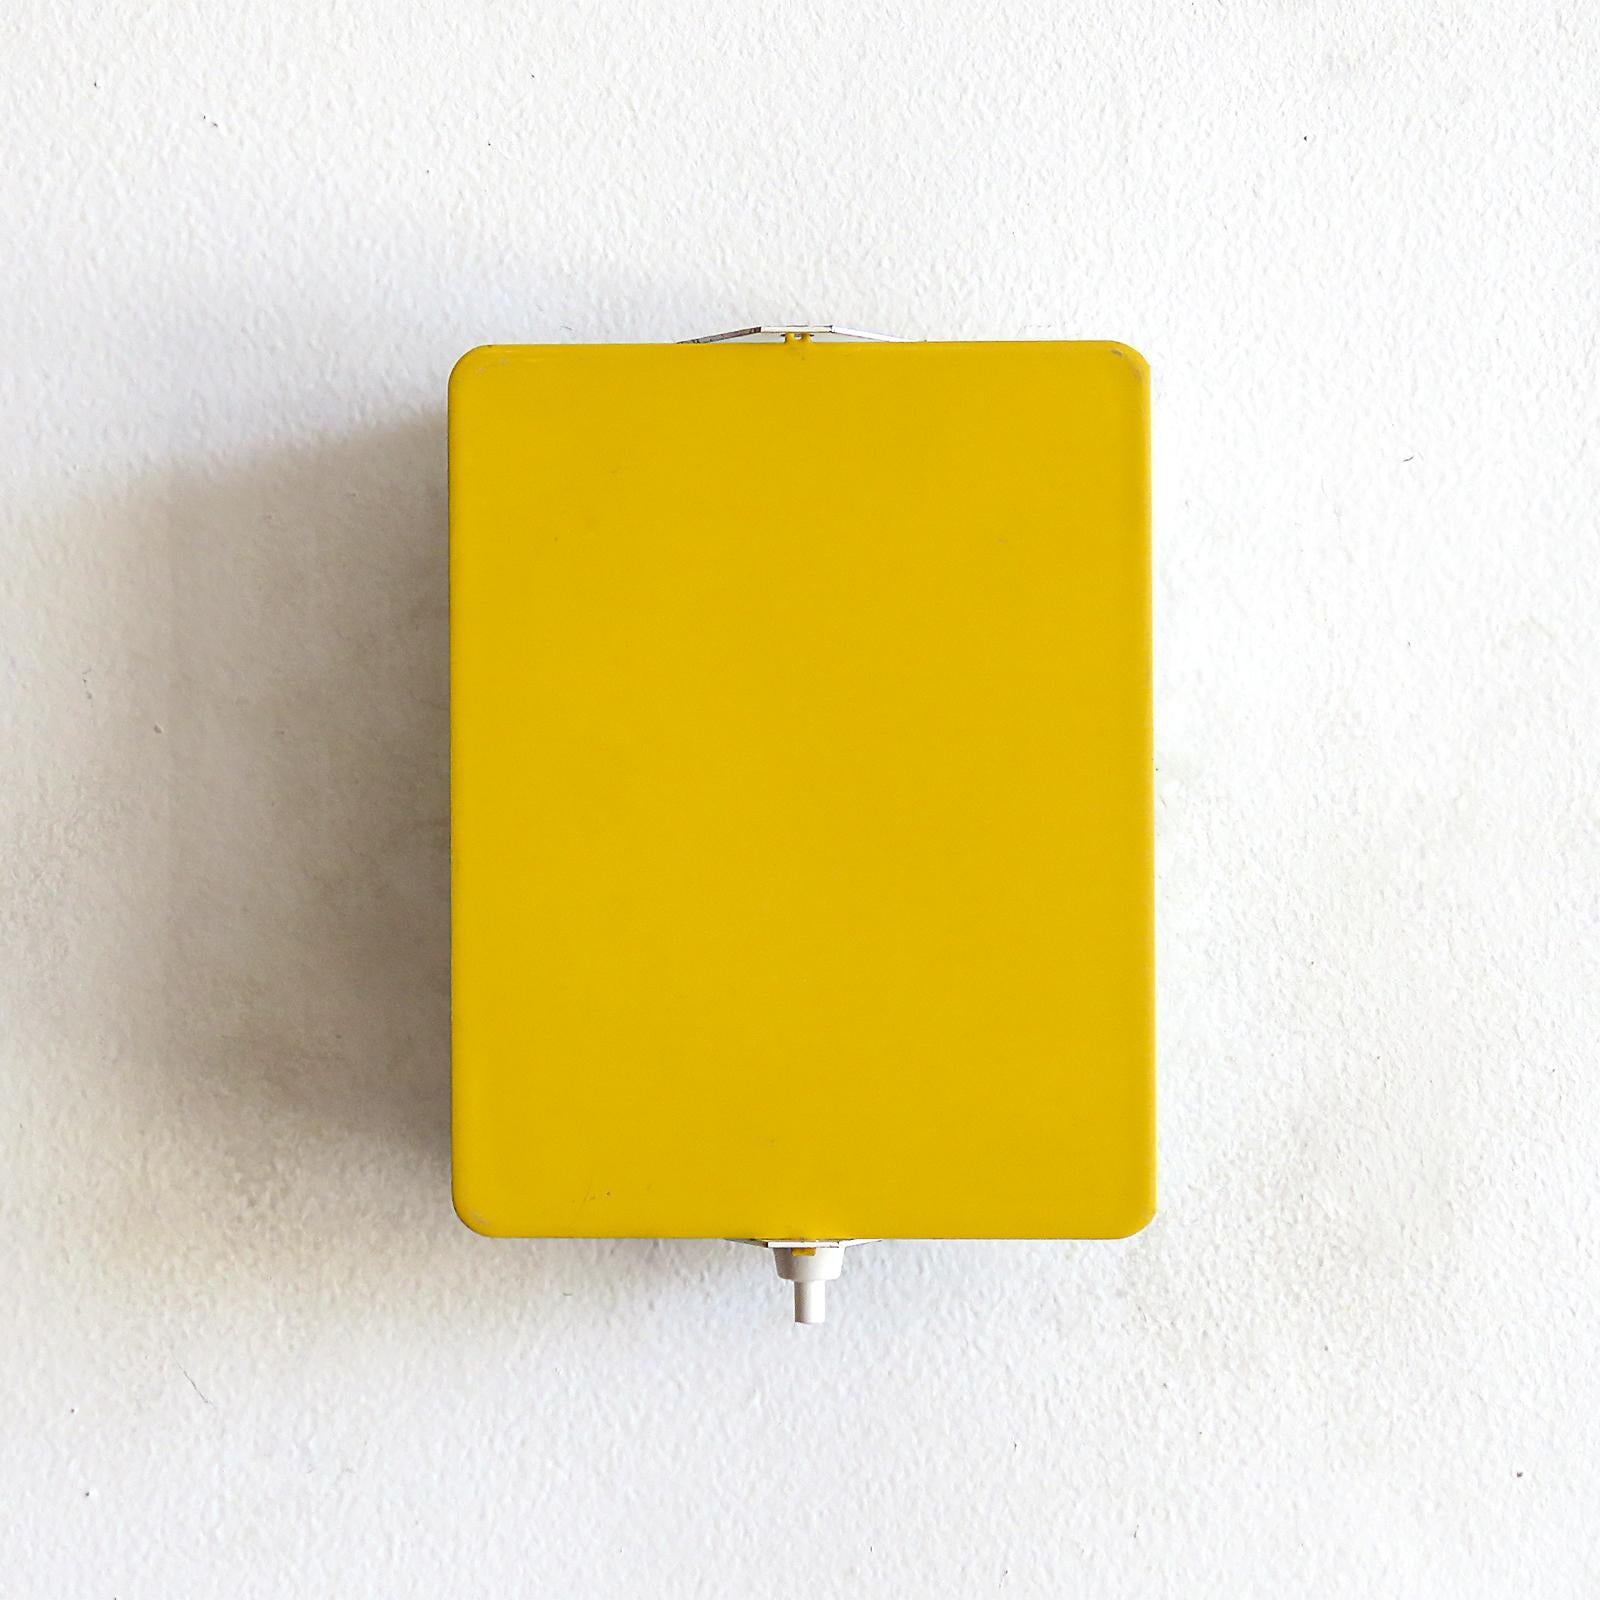 Iconic enameled wall lights by Charlotte Perriand with adjustable reflectors in rare yellow finish, optional horizontal or vertical mount, manufactured and distributed by Steph Simon, Paris, marked. Wired for US standards, one E12 sockets each, max.